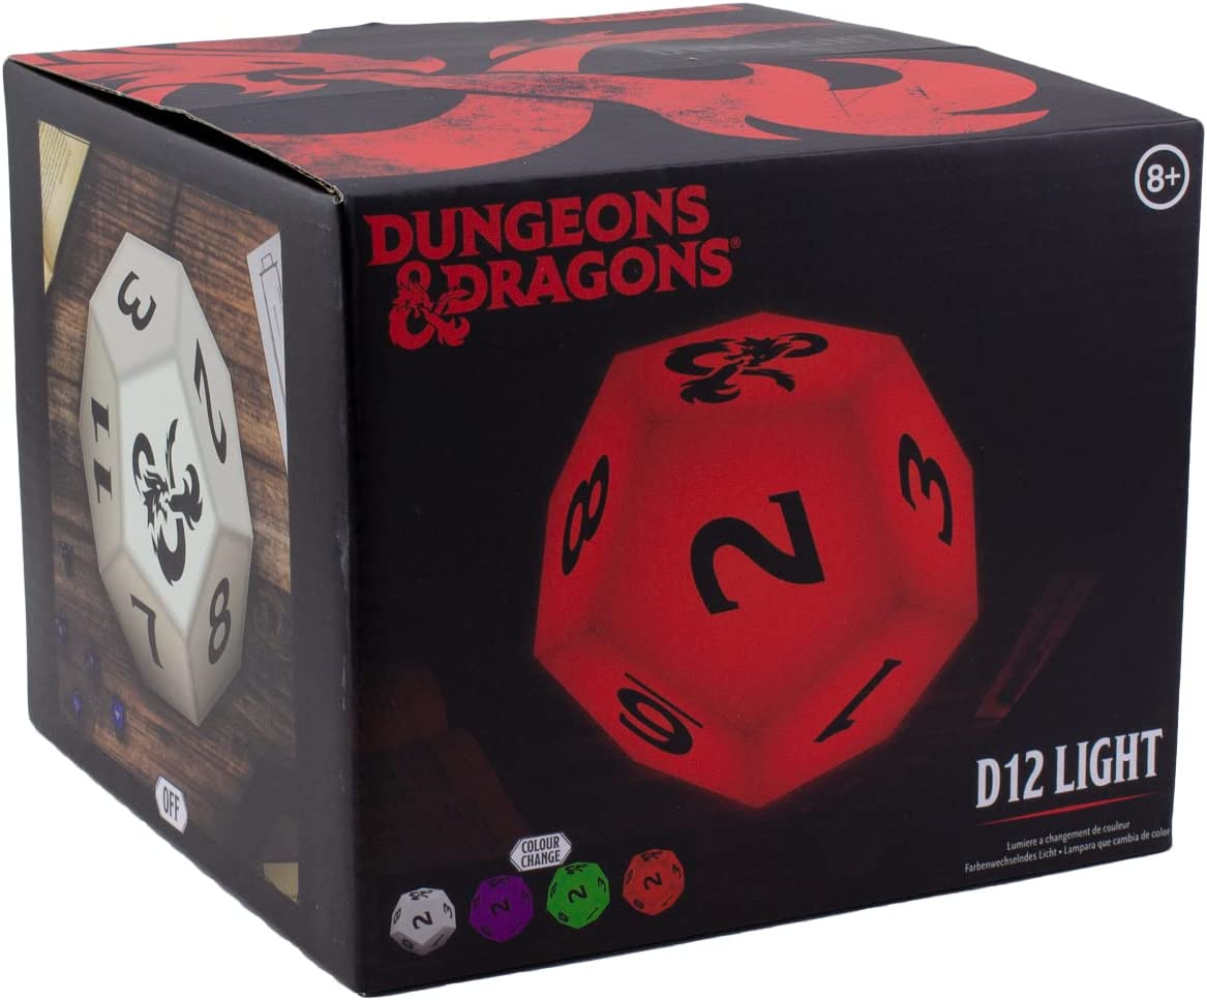 Dungeons & Dragons D12 Dice Colour-Changing Light Homeware 2